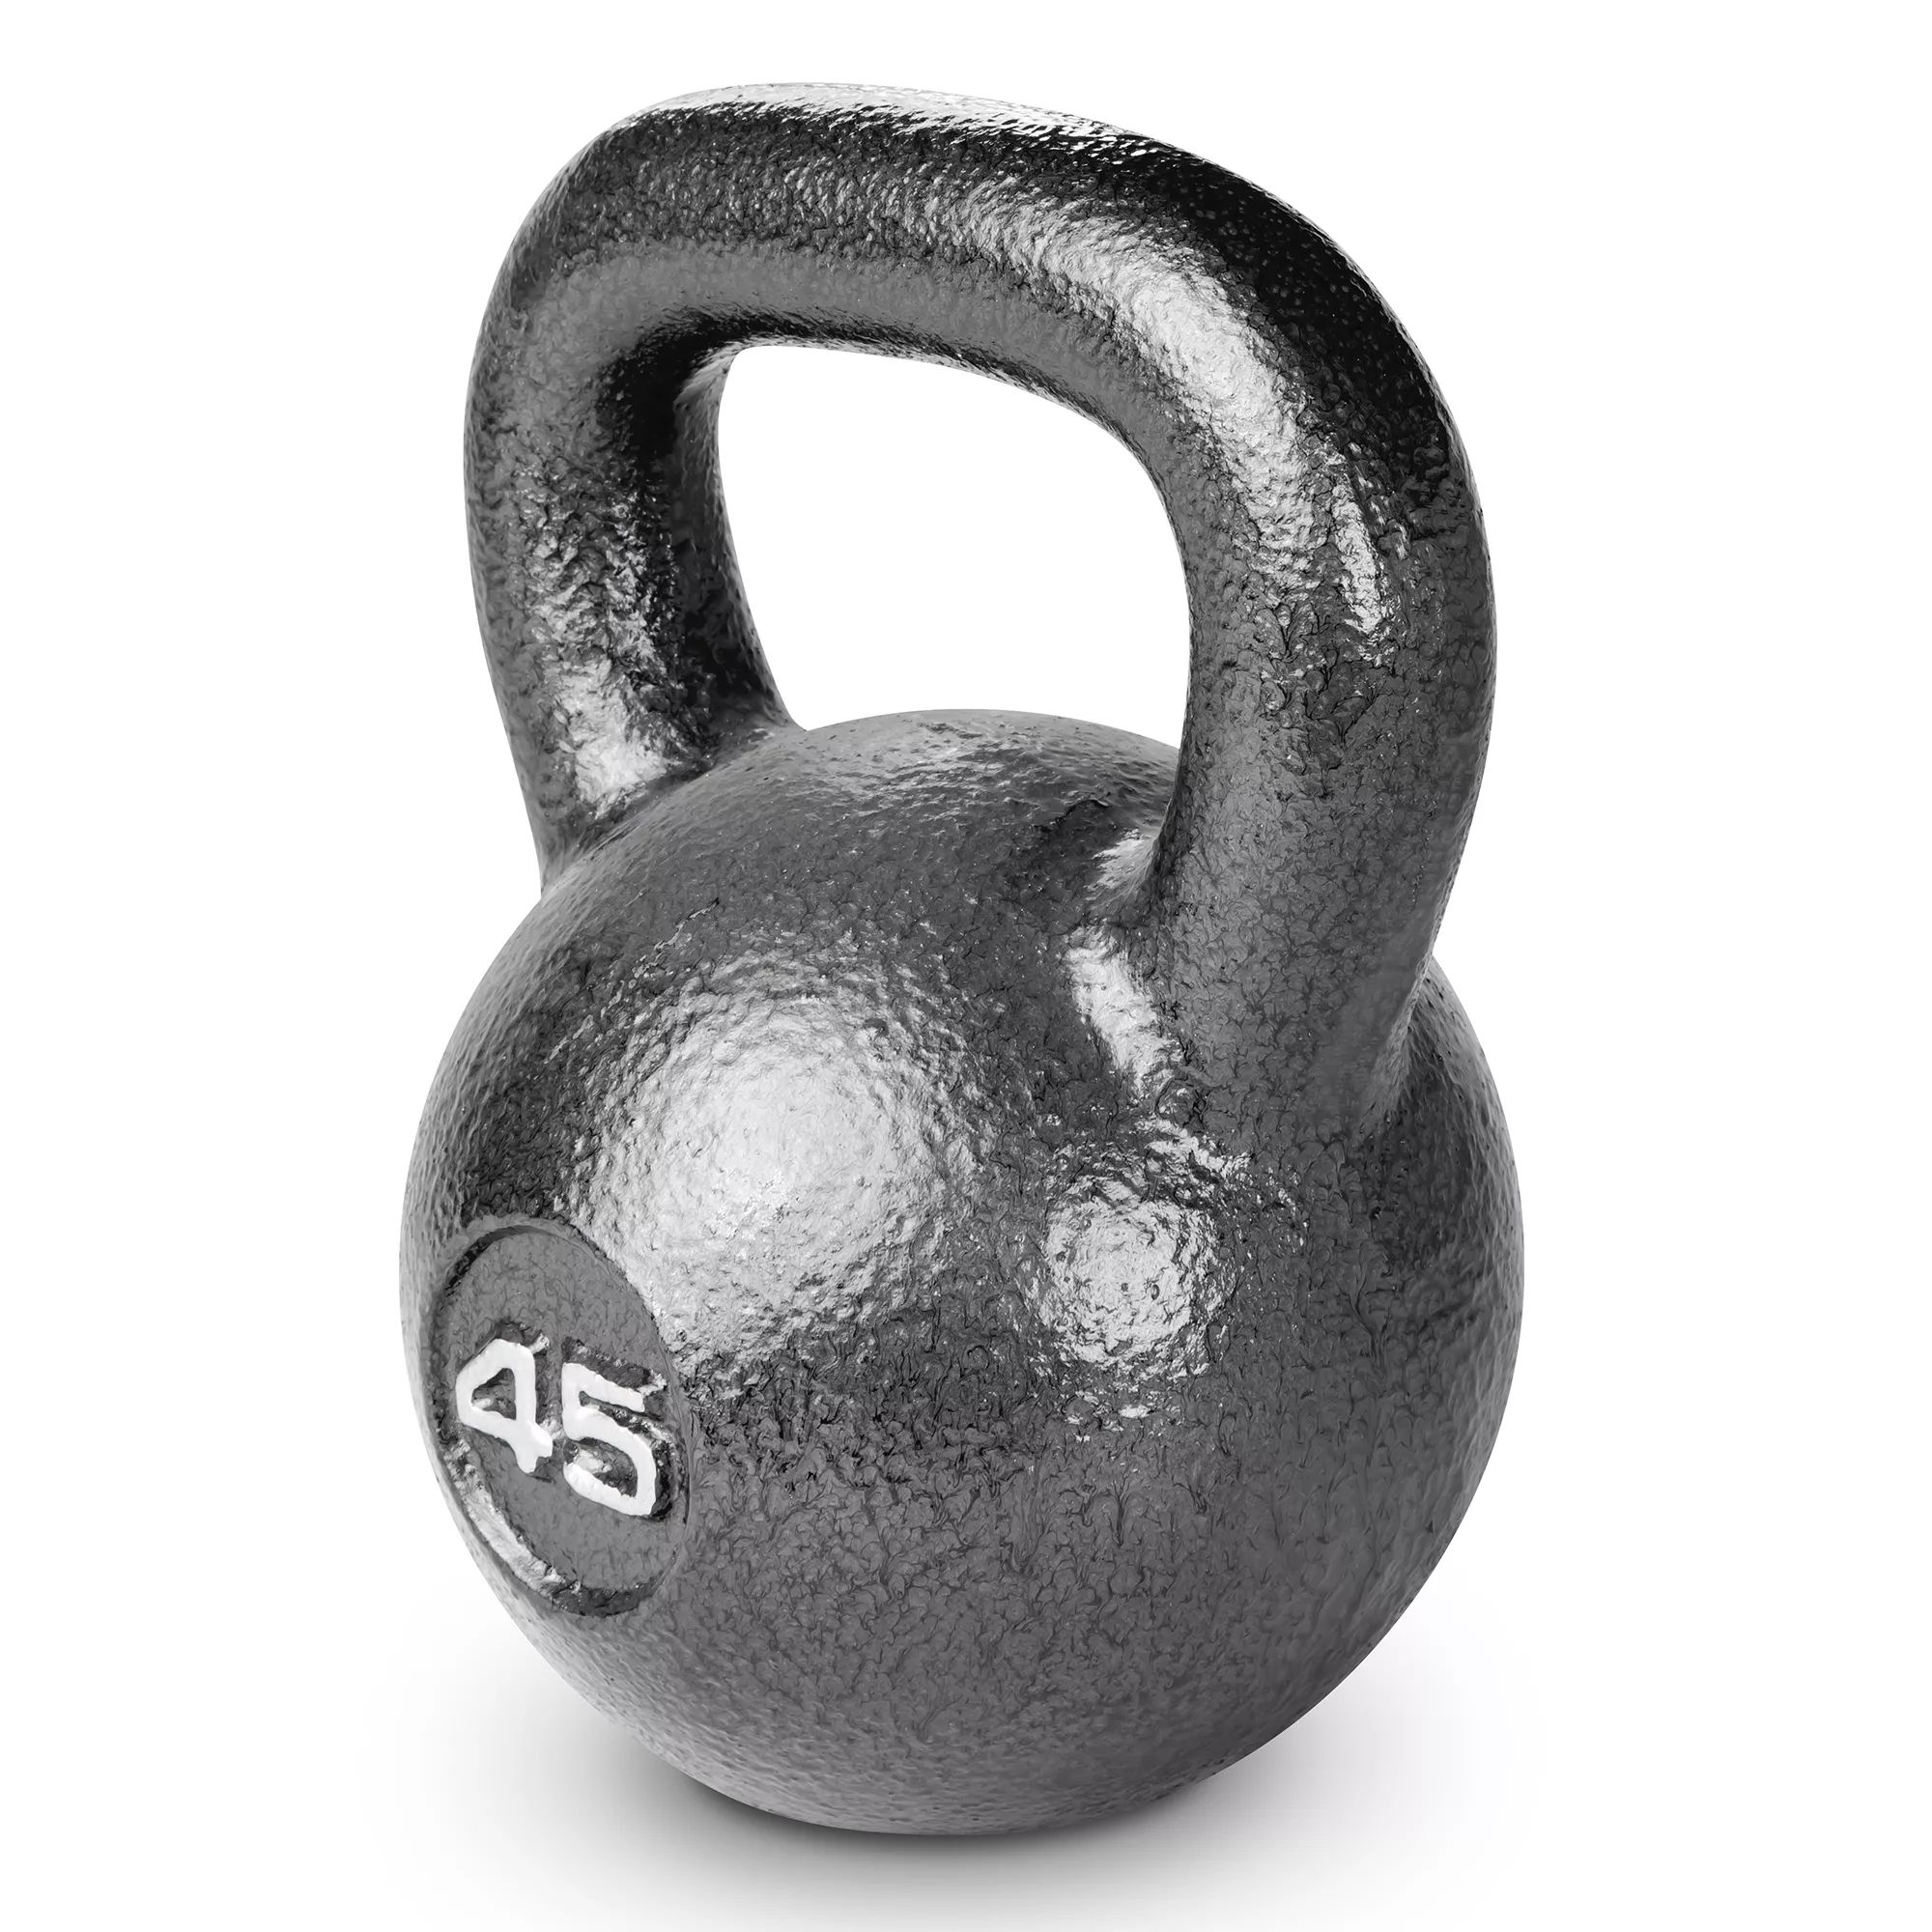 Marcy 45lb. Kettle Bell | Dick's Sporting Goods